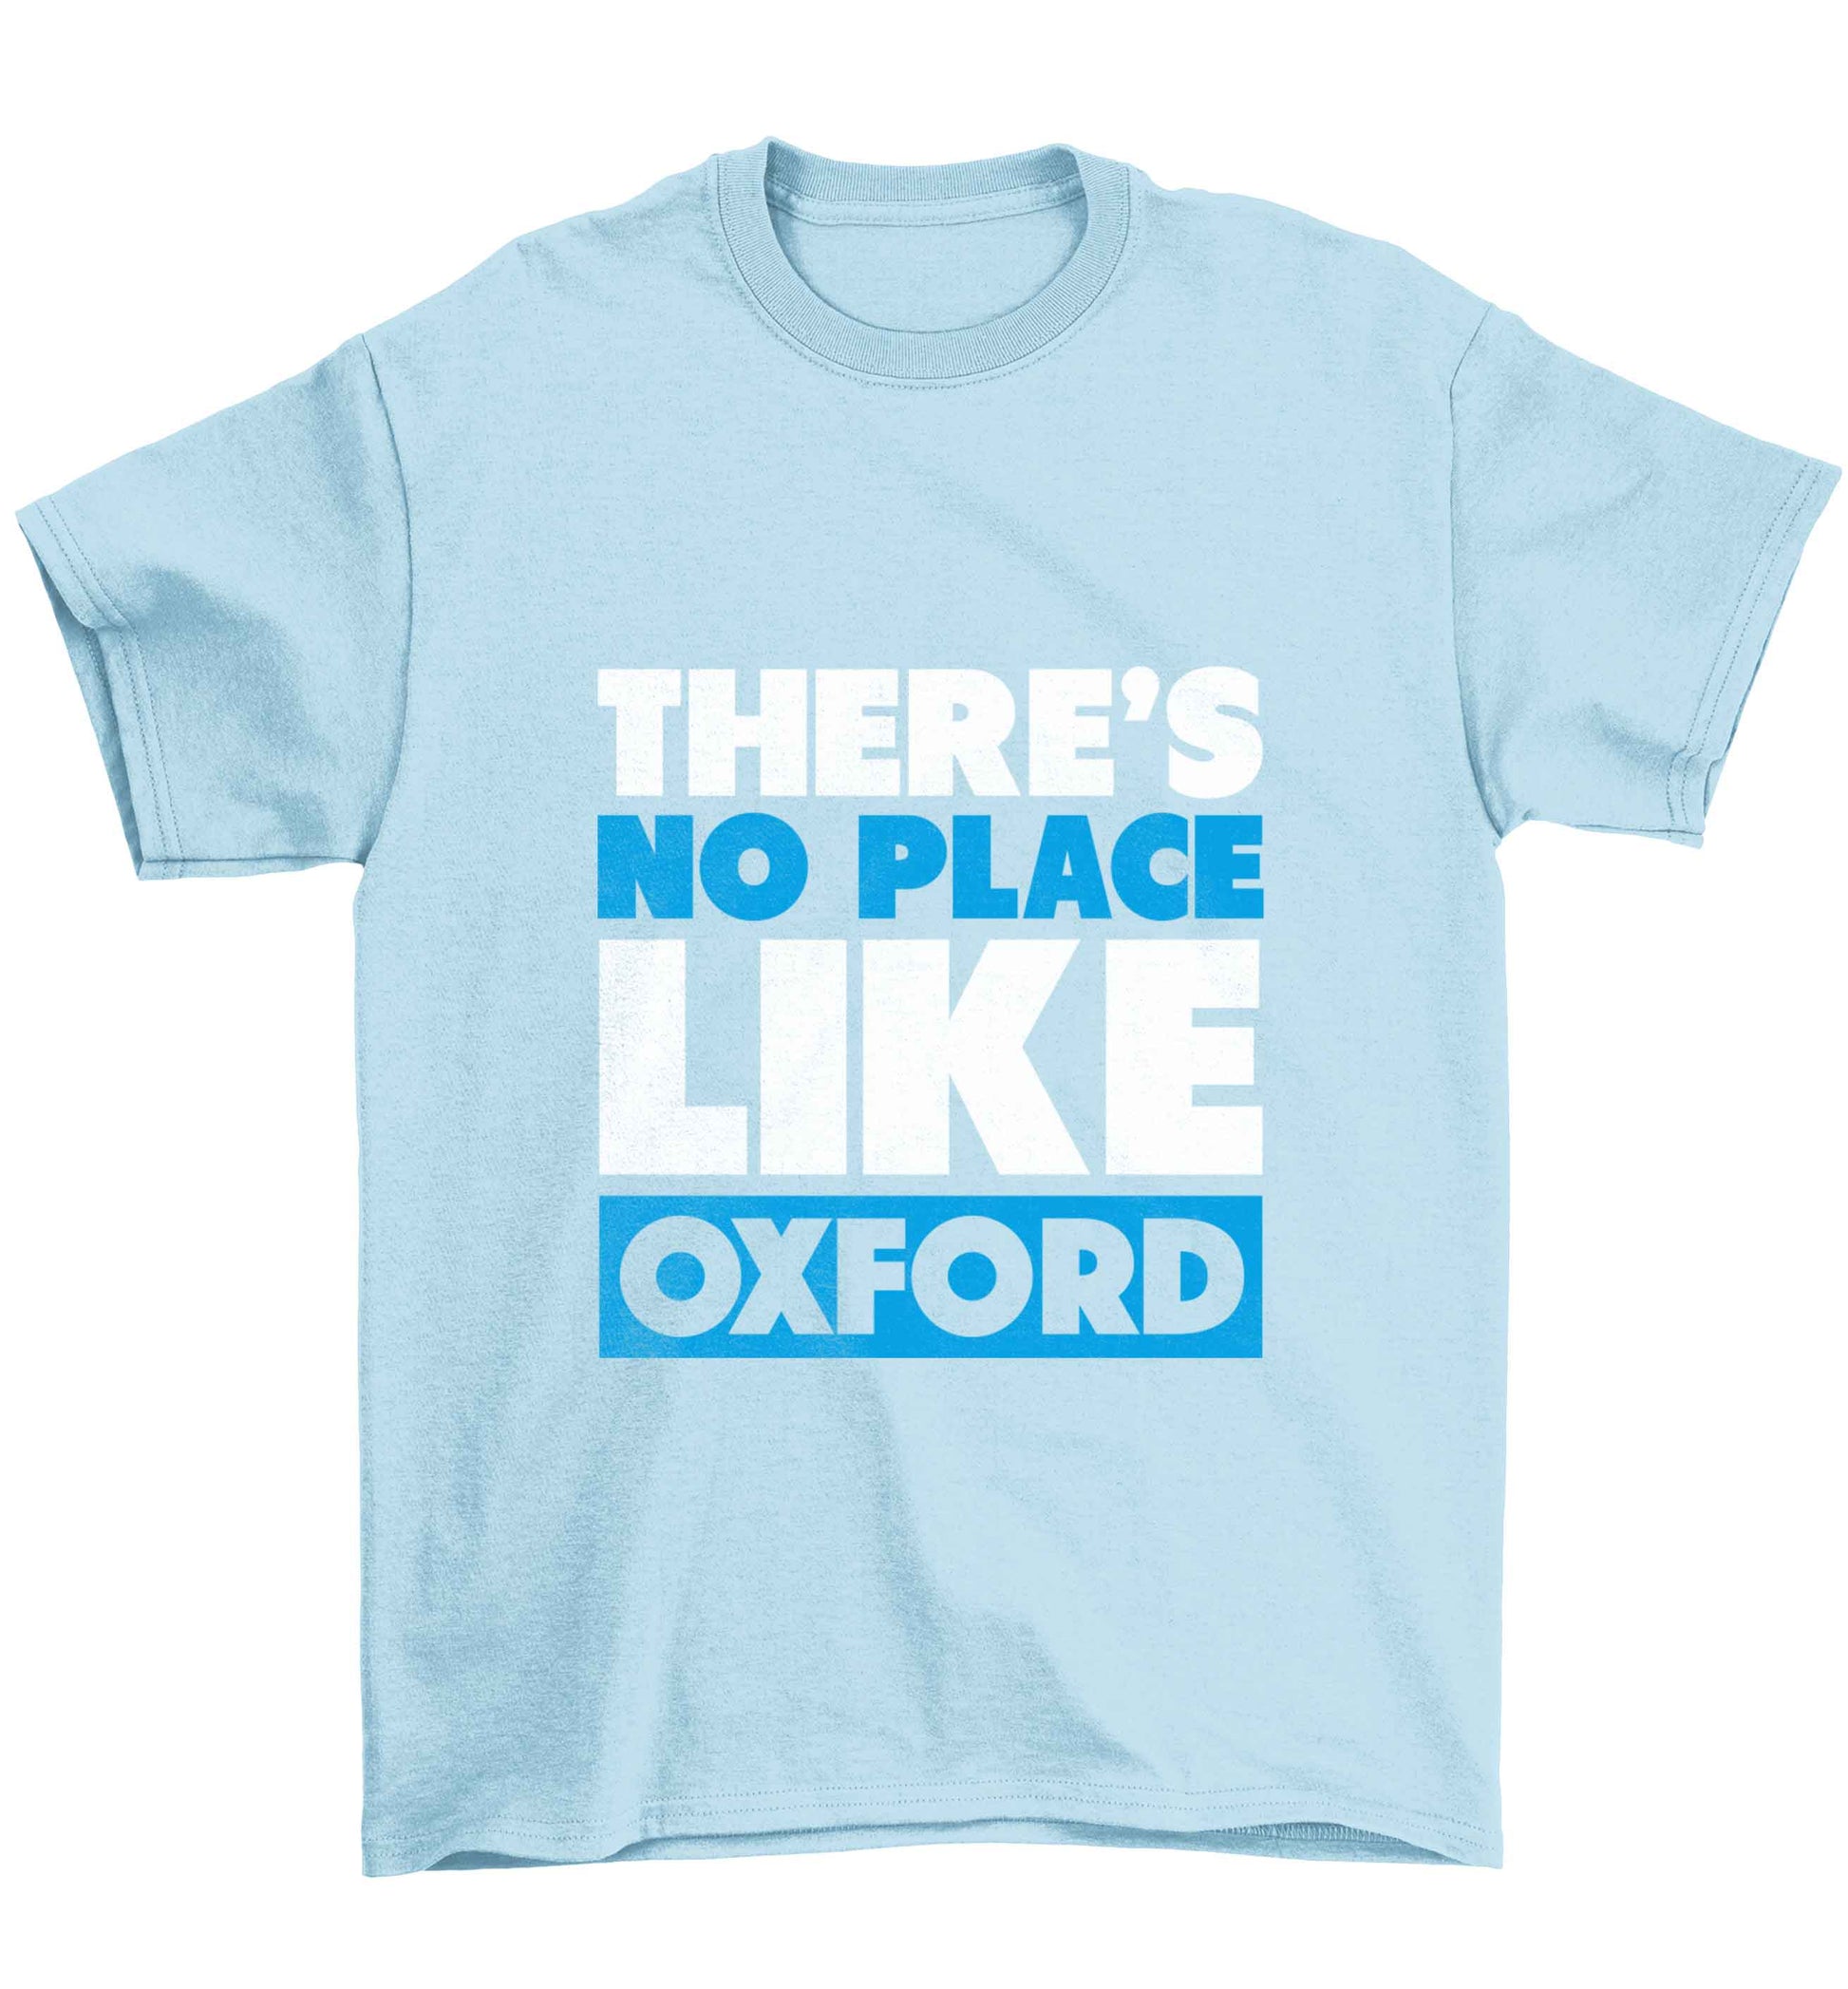 There's no place like Oxford Children's light blue Tshirt 12-13 Years